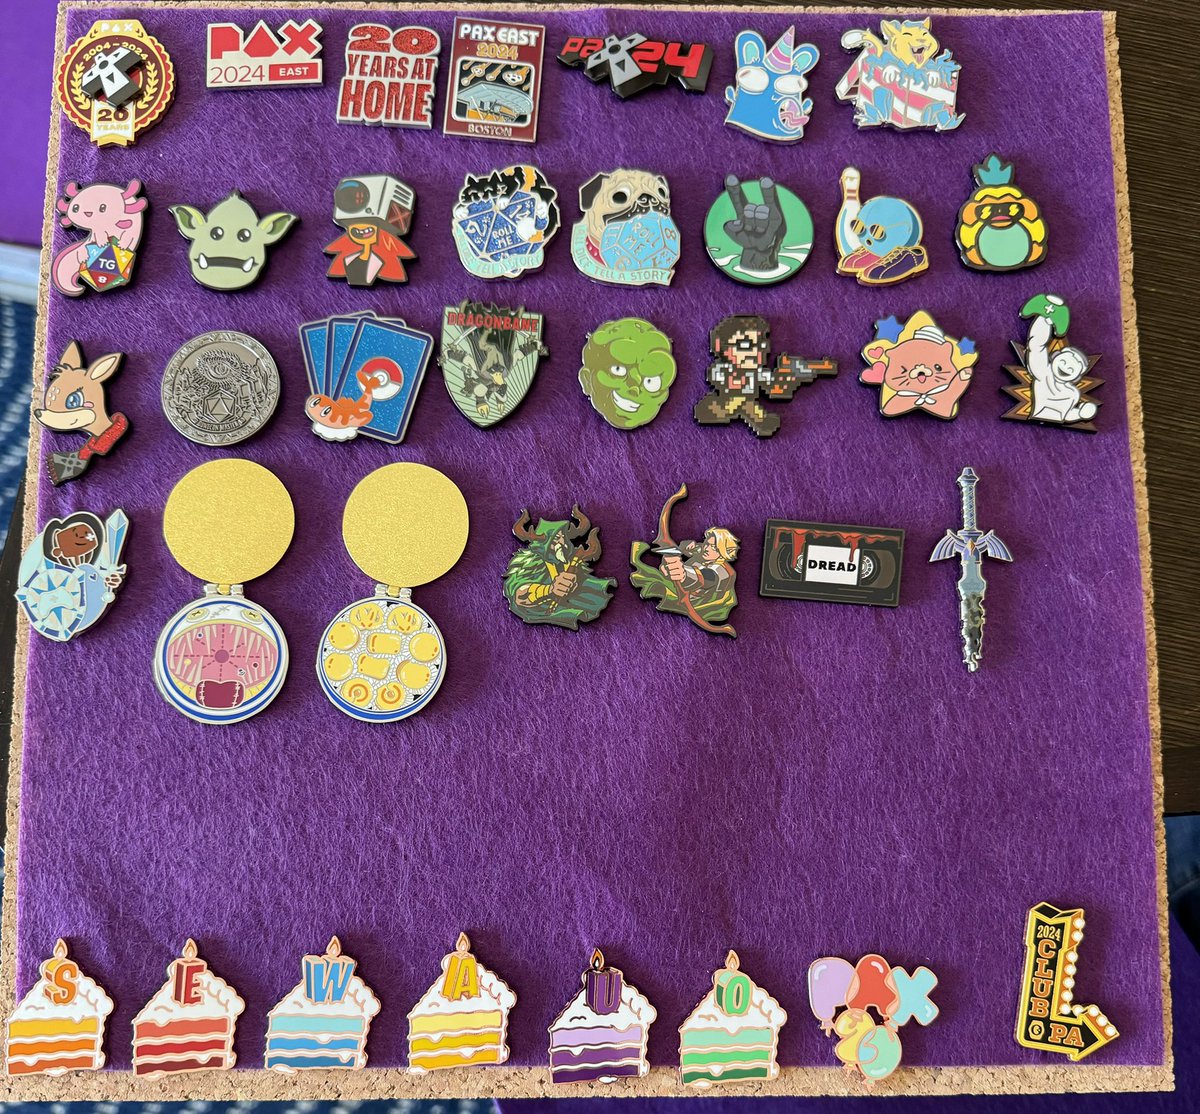 #PAXEast2024 @pinny_arcade pin quest done. I love the 2024 cake set